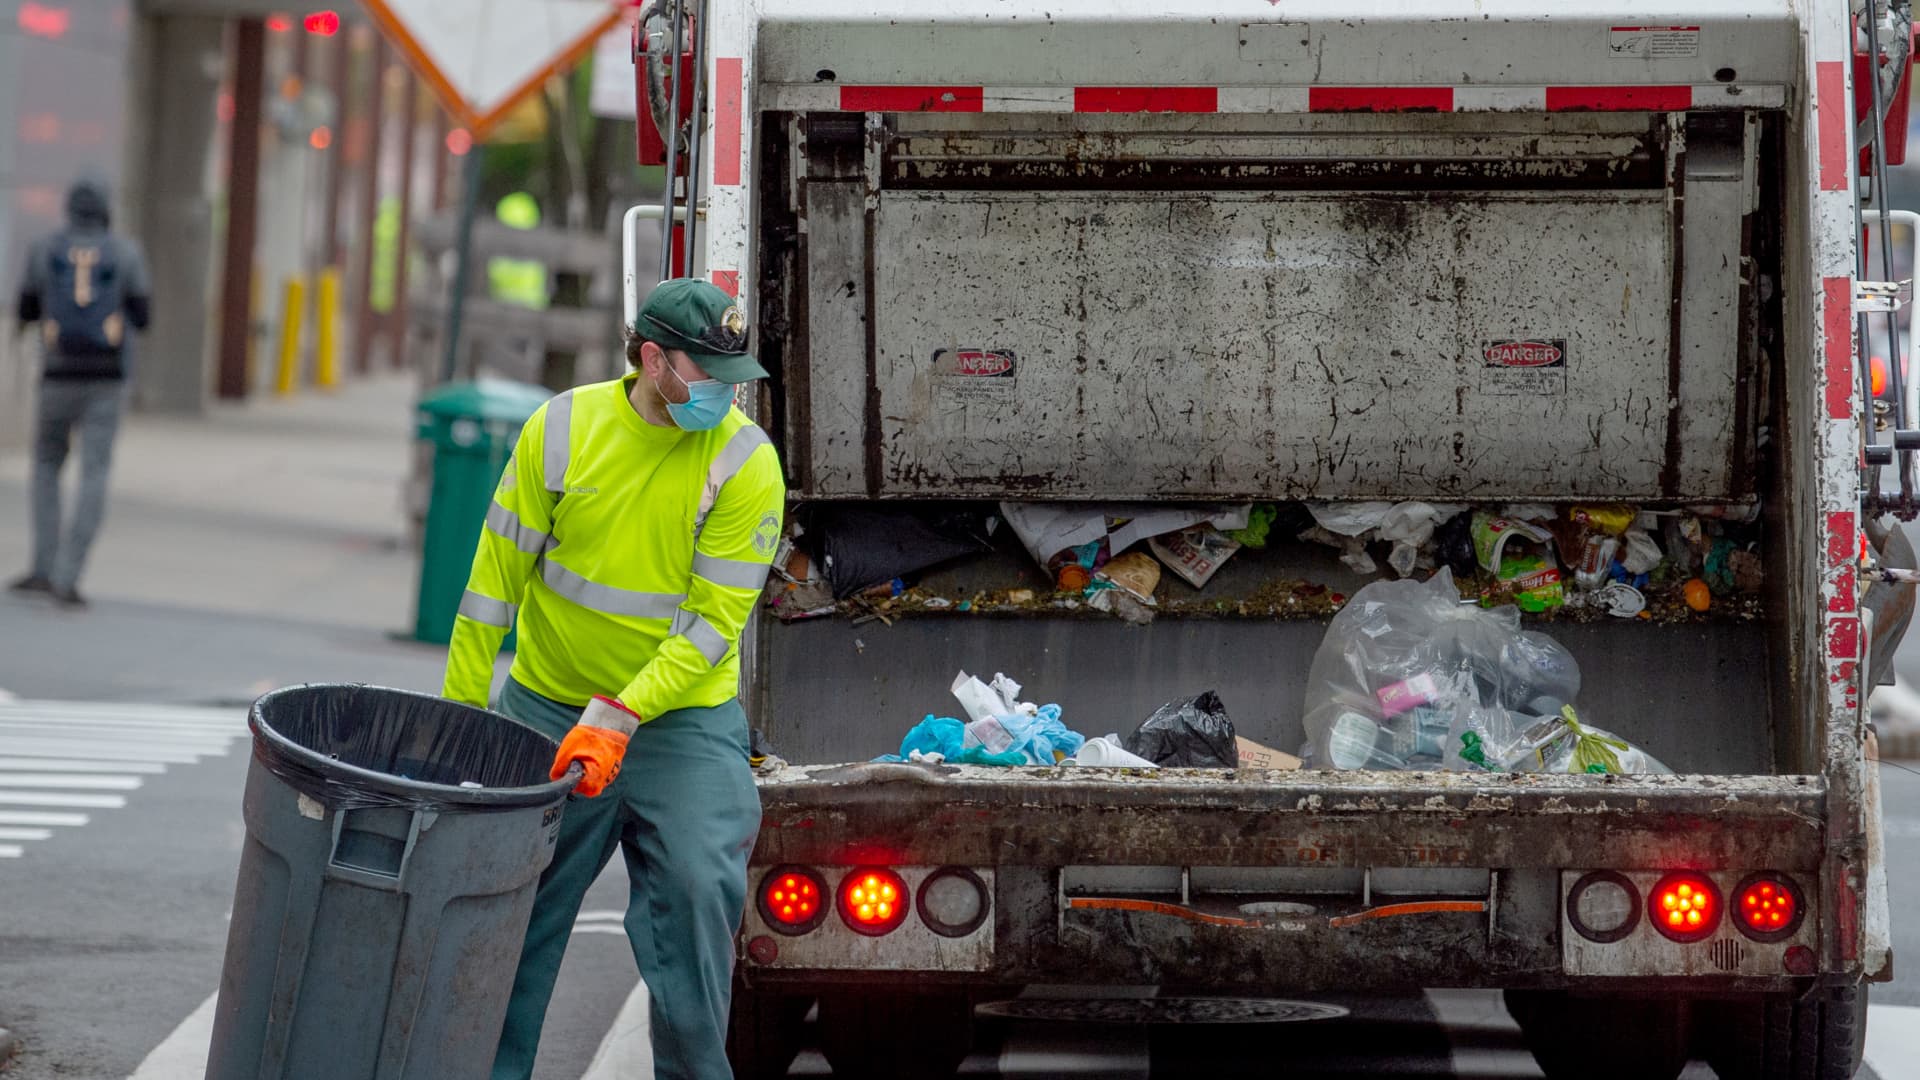 A New York City Department of Sanitation worker wearing a mask and gloves collects the trash amid the coronavirus pandemic on April 30, 2020.